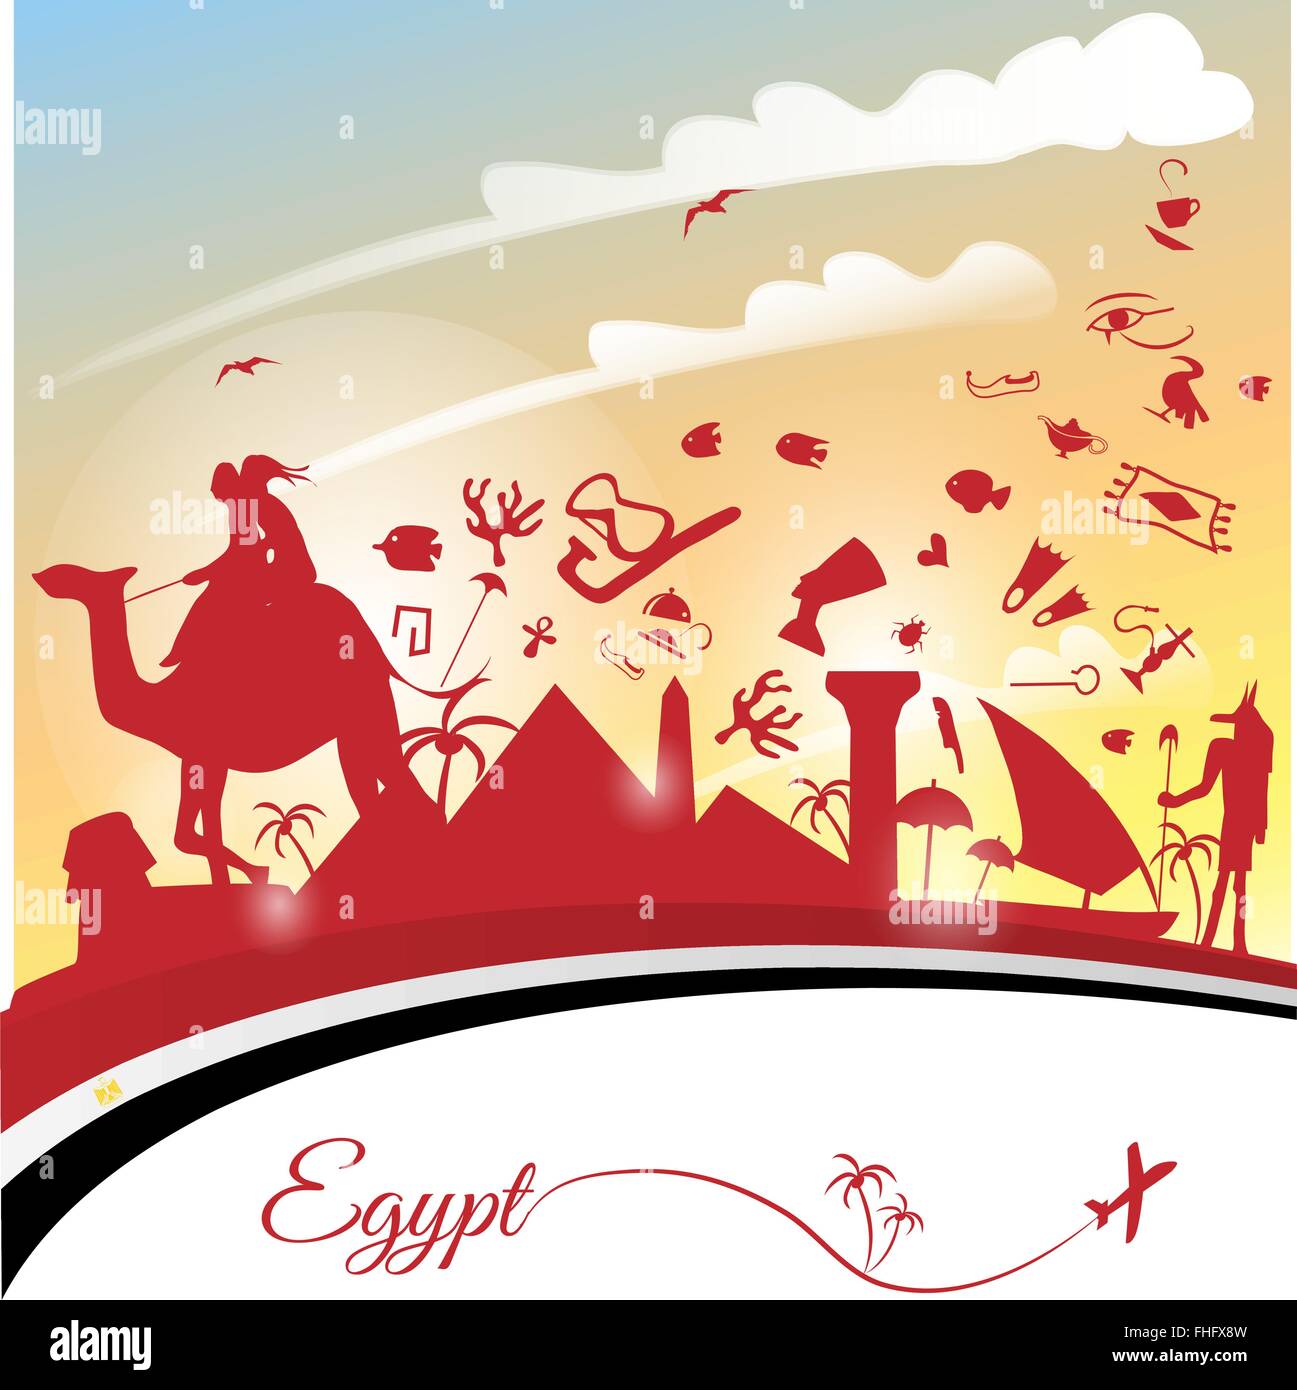 egypt background with flag and symbol Stock Vector